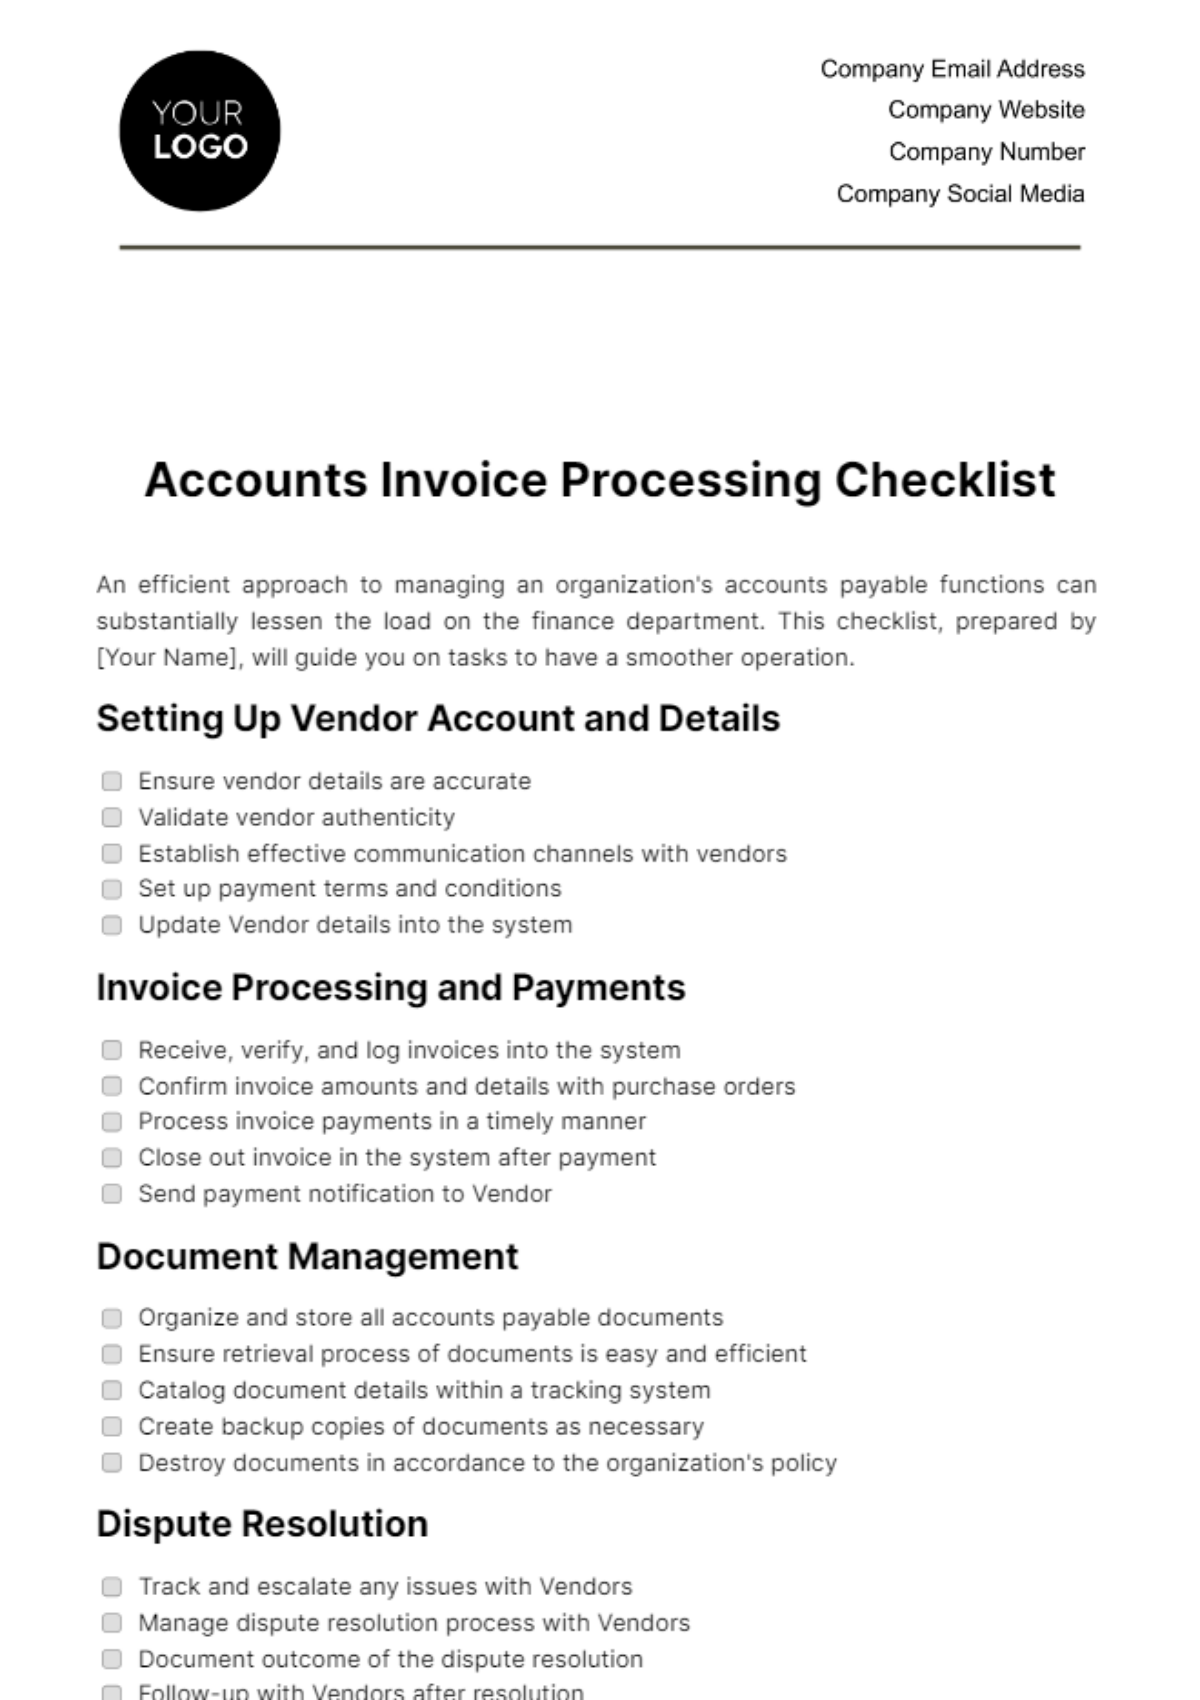 Free Accounts Invoice Processing Checklist Template